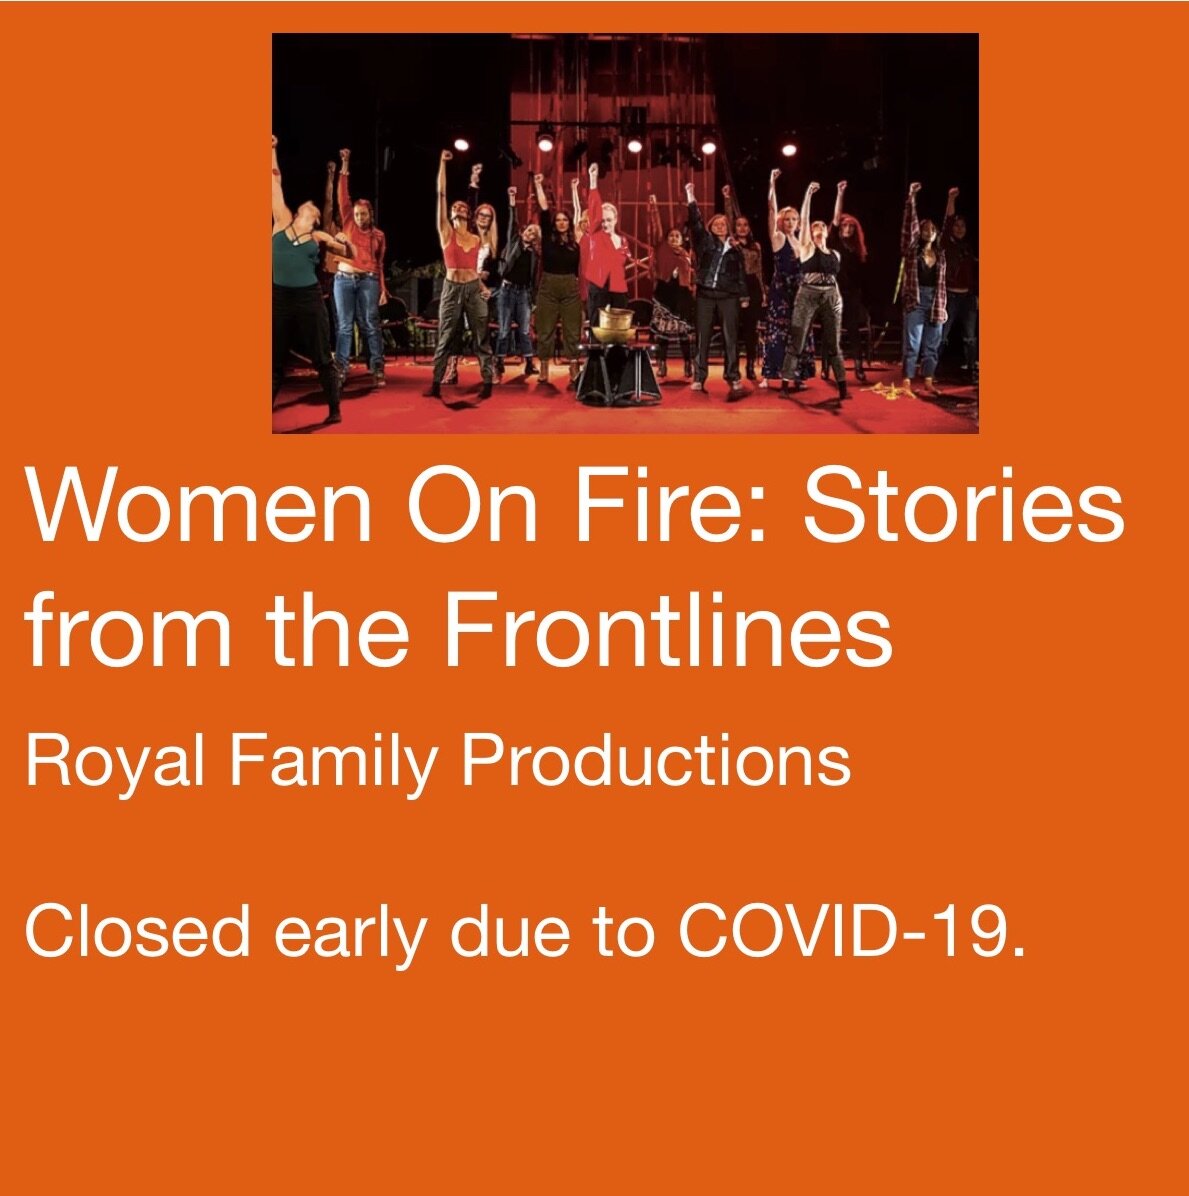 Women on Fire: Stories from the Frontlines